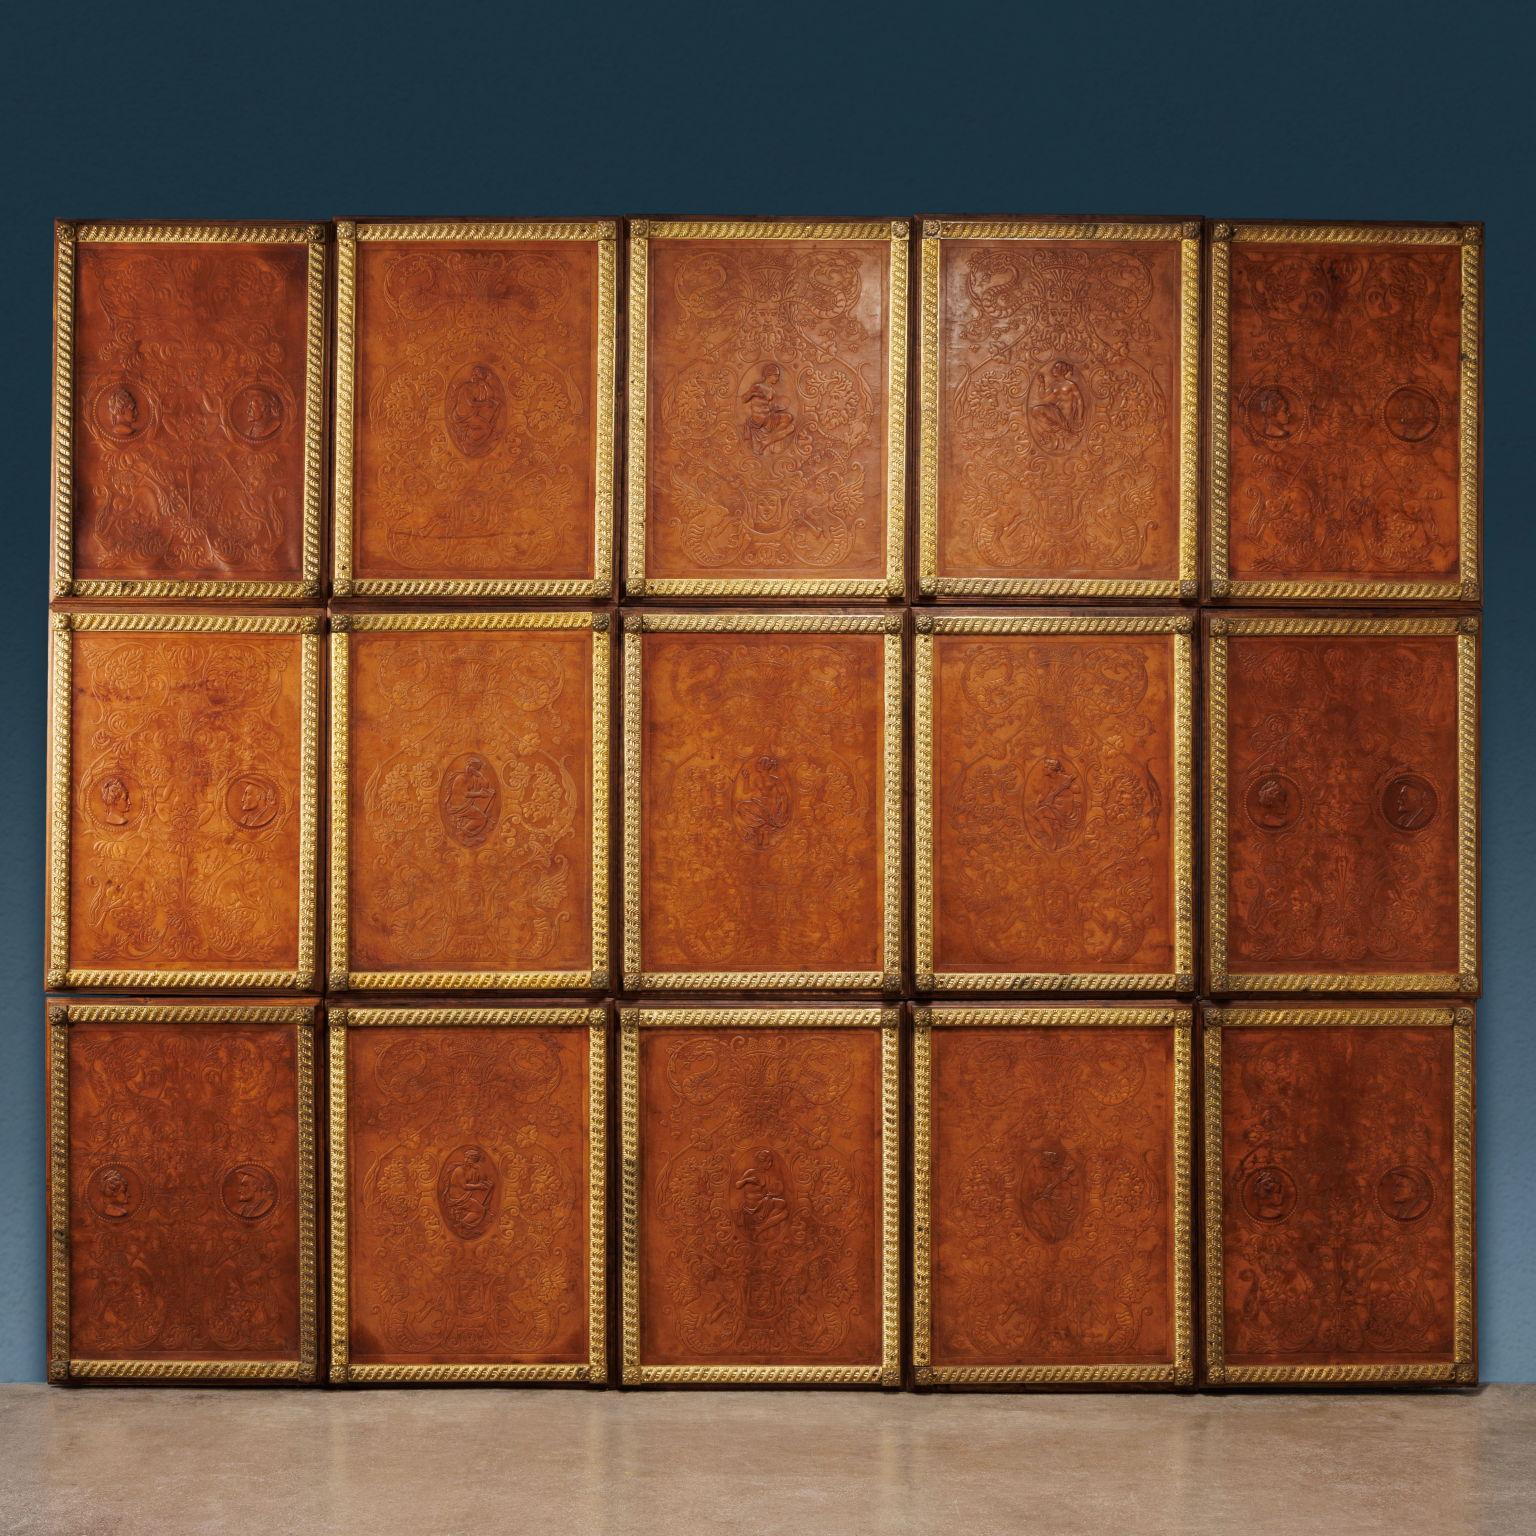 Series of 15 leather panels mounted on walnut frame and framed by gilt bronze frames; these are composed of a bundle held by a ribbon of rope and concluded in the corners by rosettes. The panels, worked by impression, are decorated with grotesque